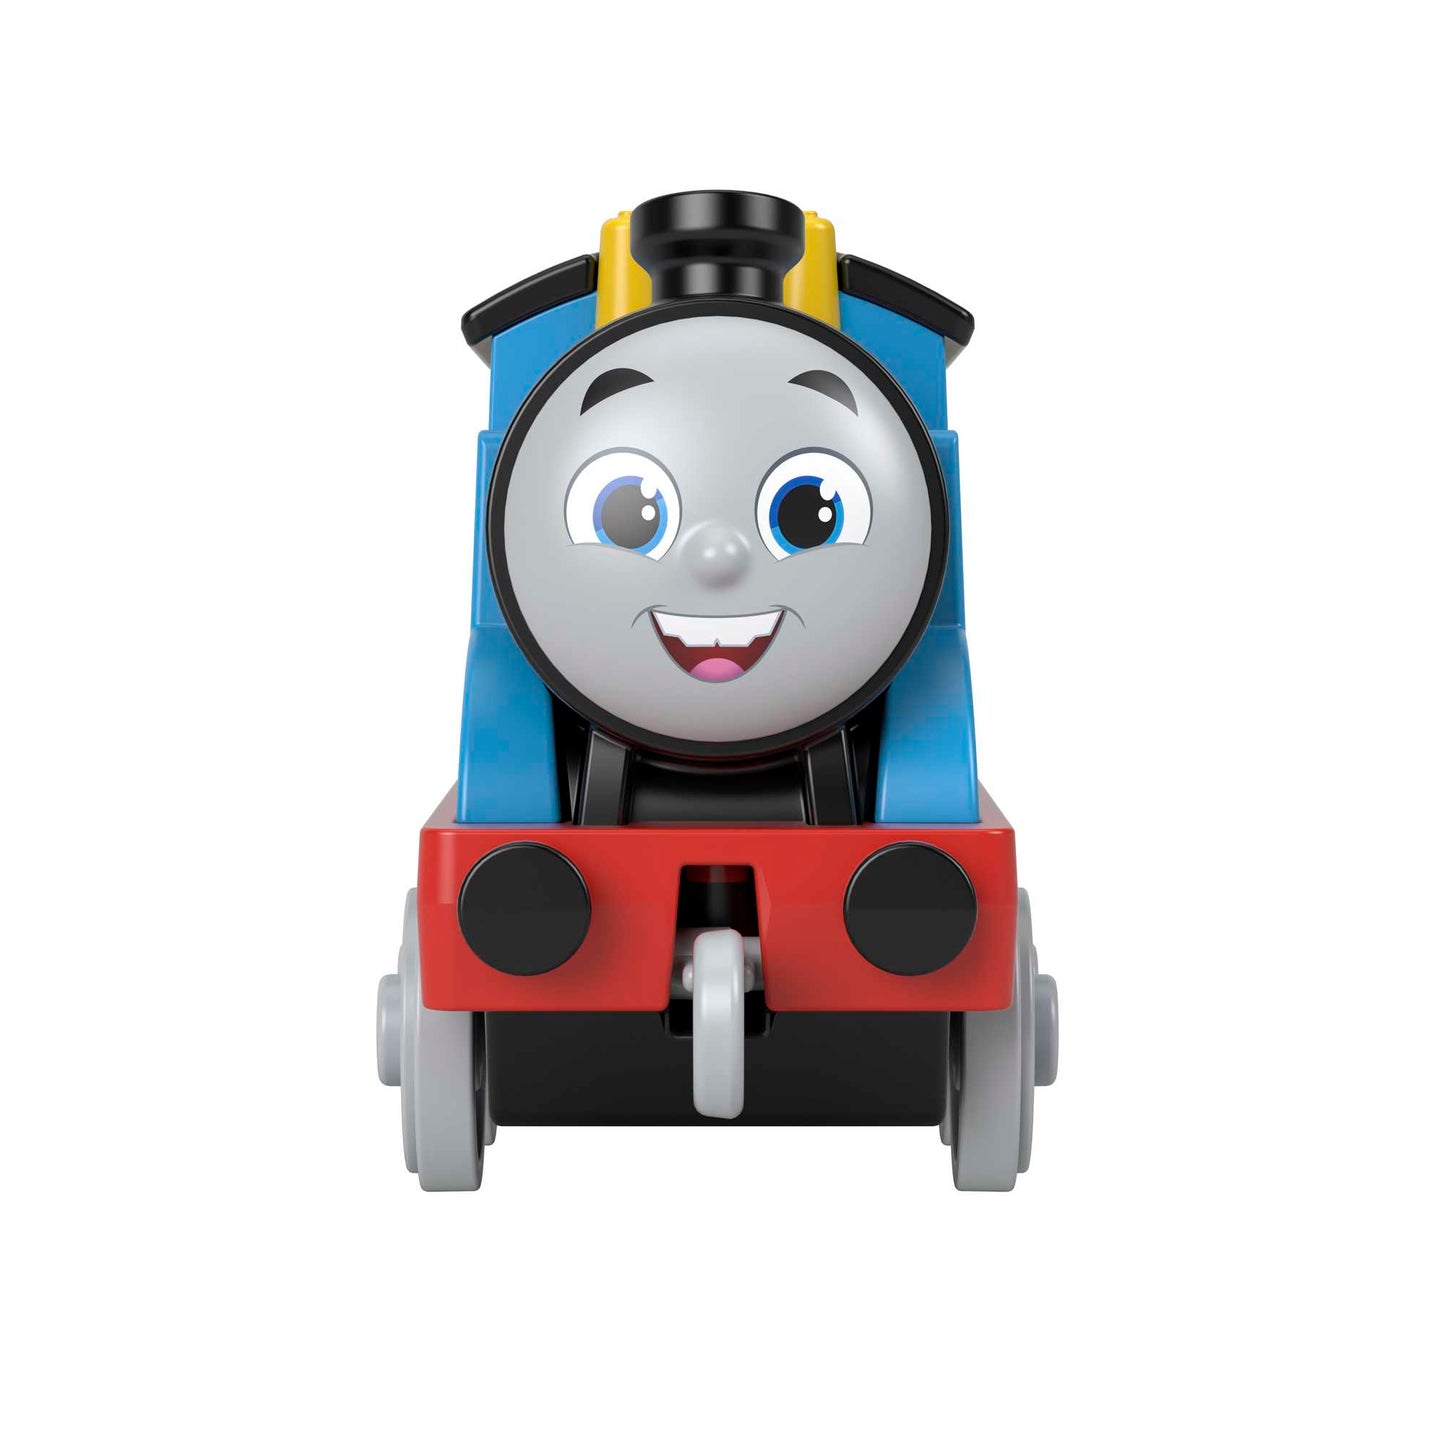 Fisher-Price Thomas & Friends Metal Engine - Assorted*